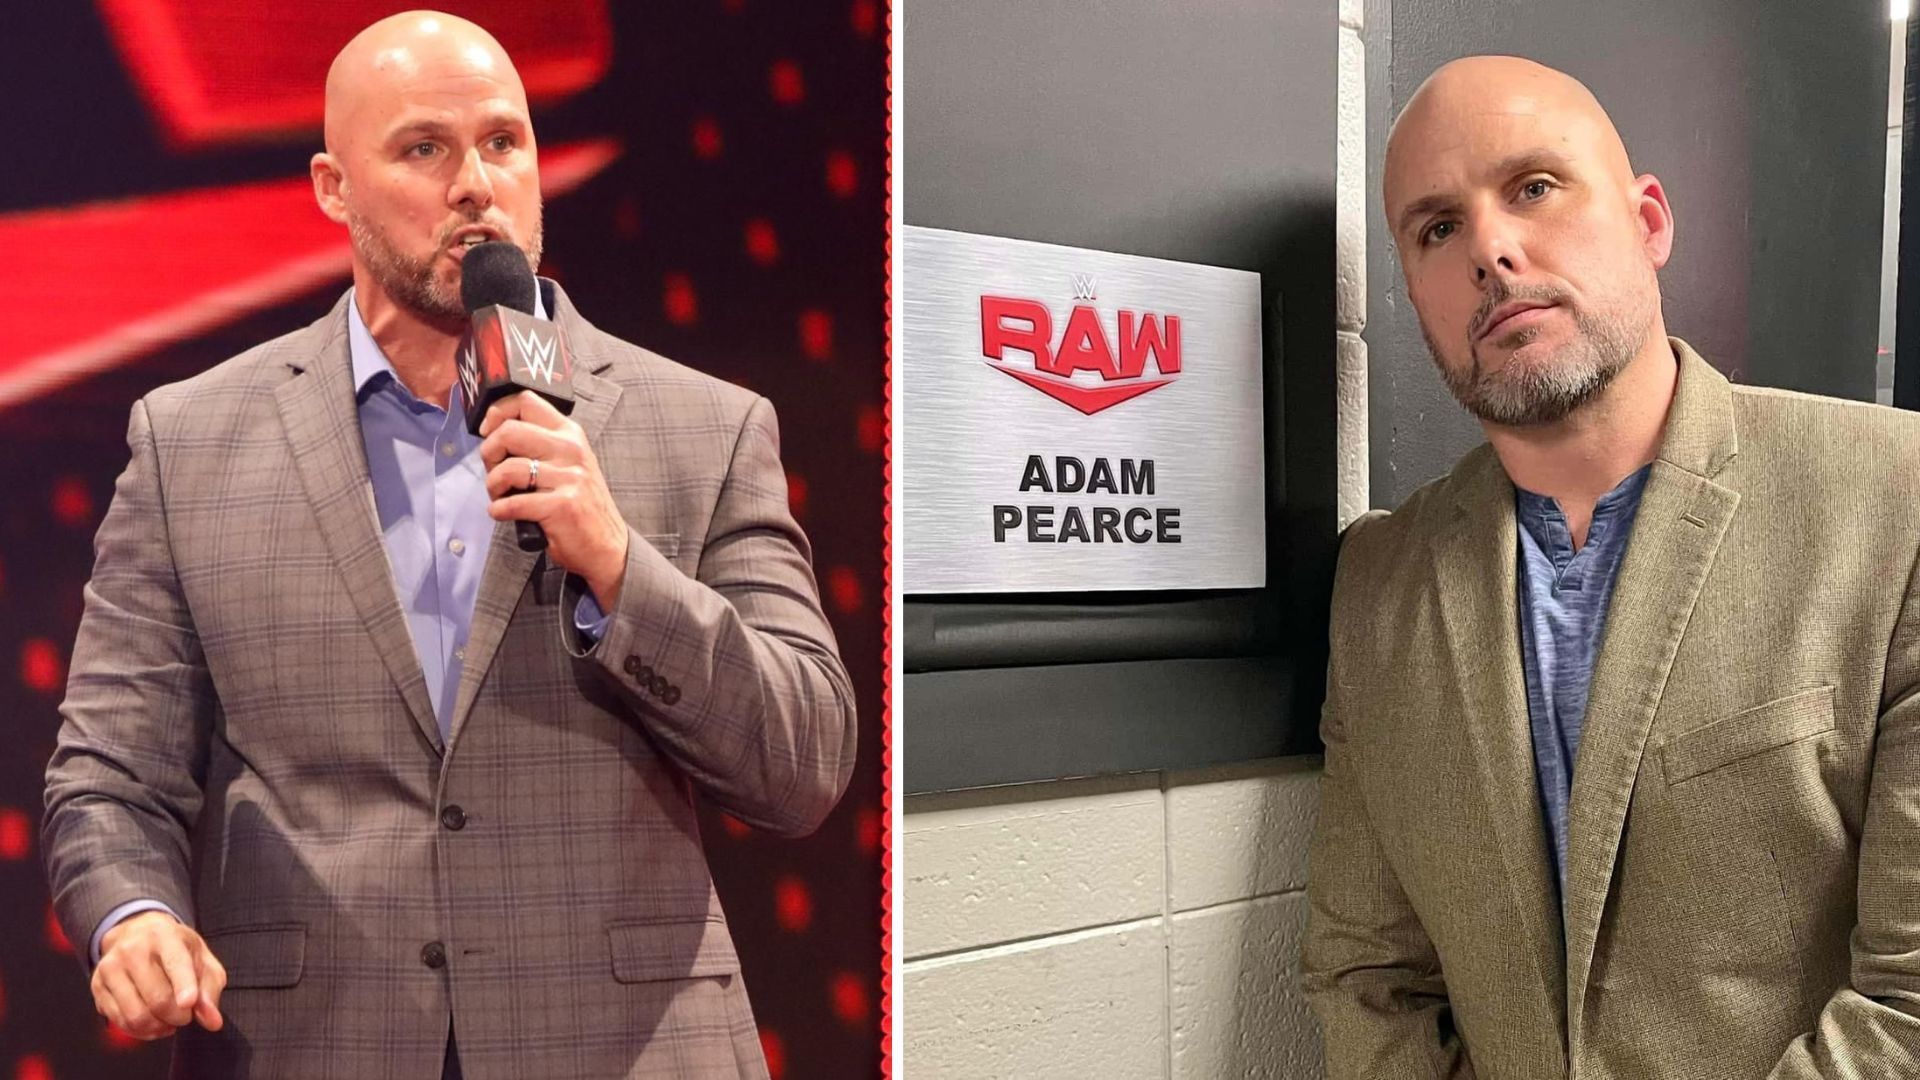 Pearce currently serves as the RAW GM.